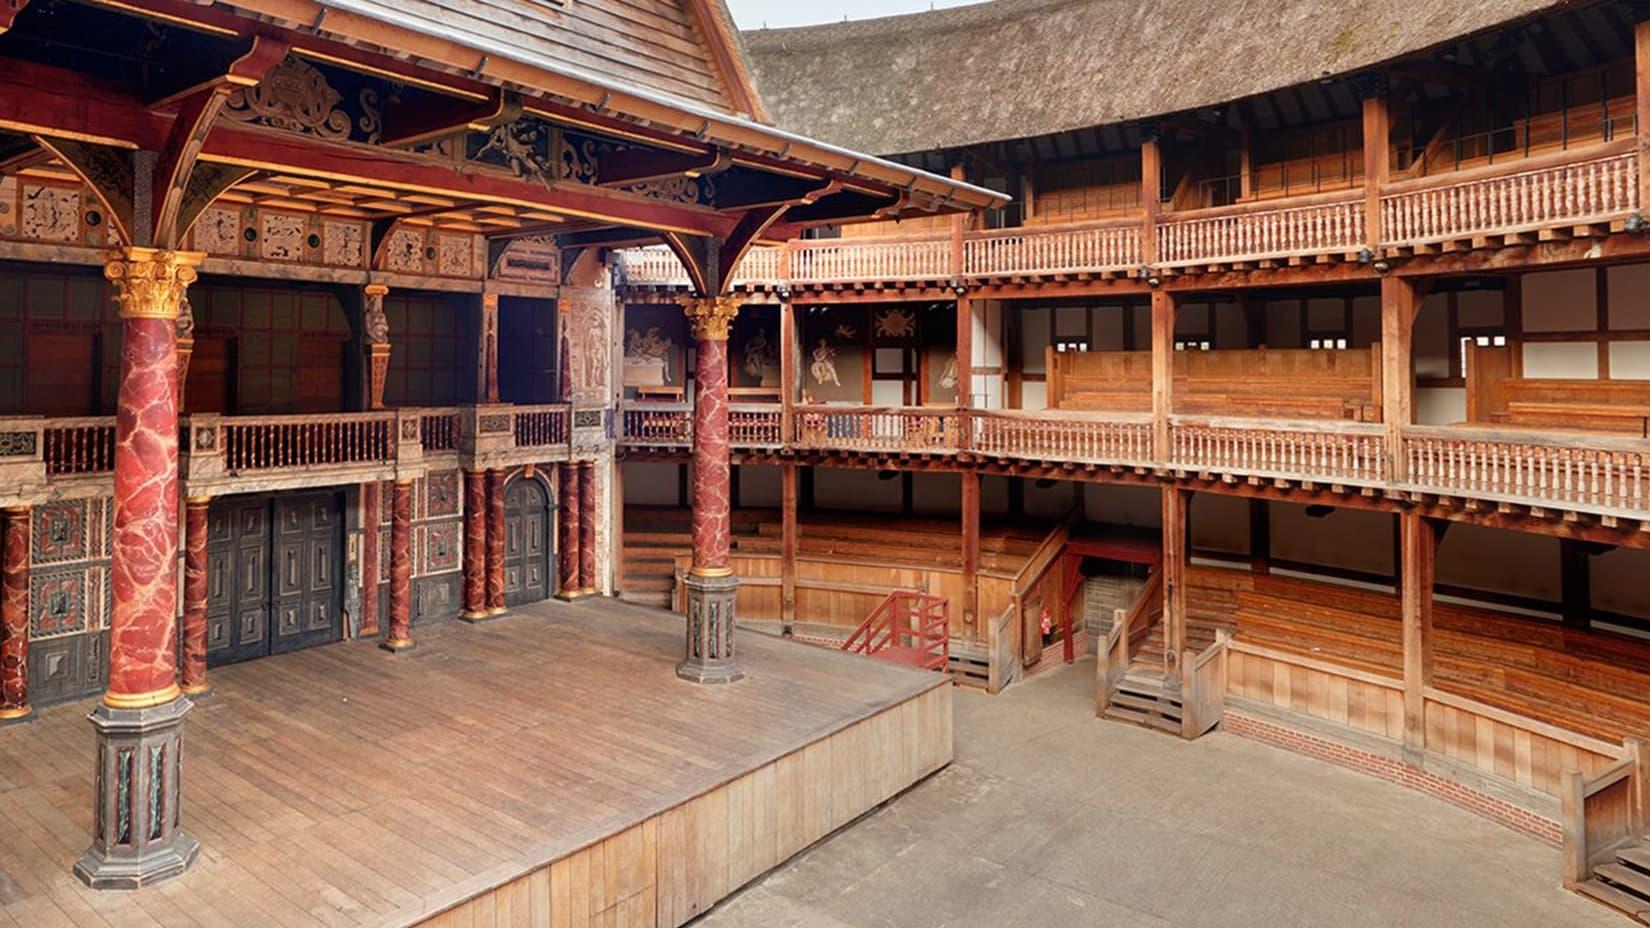 Measure for Measure: Live from The Globe backdrop